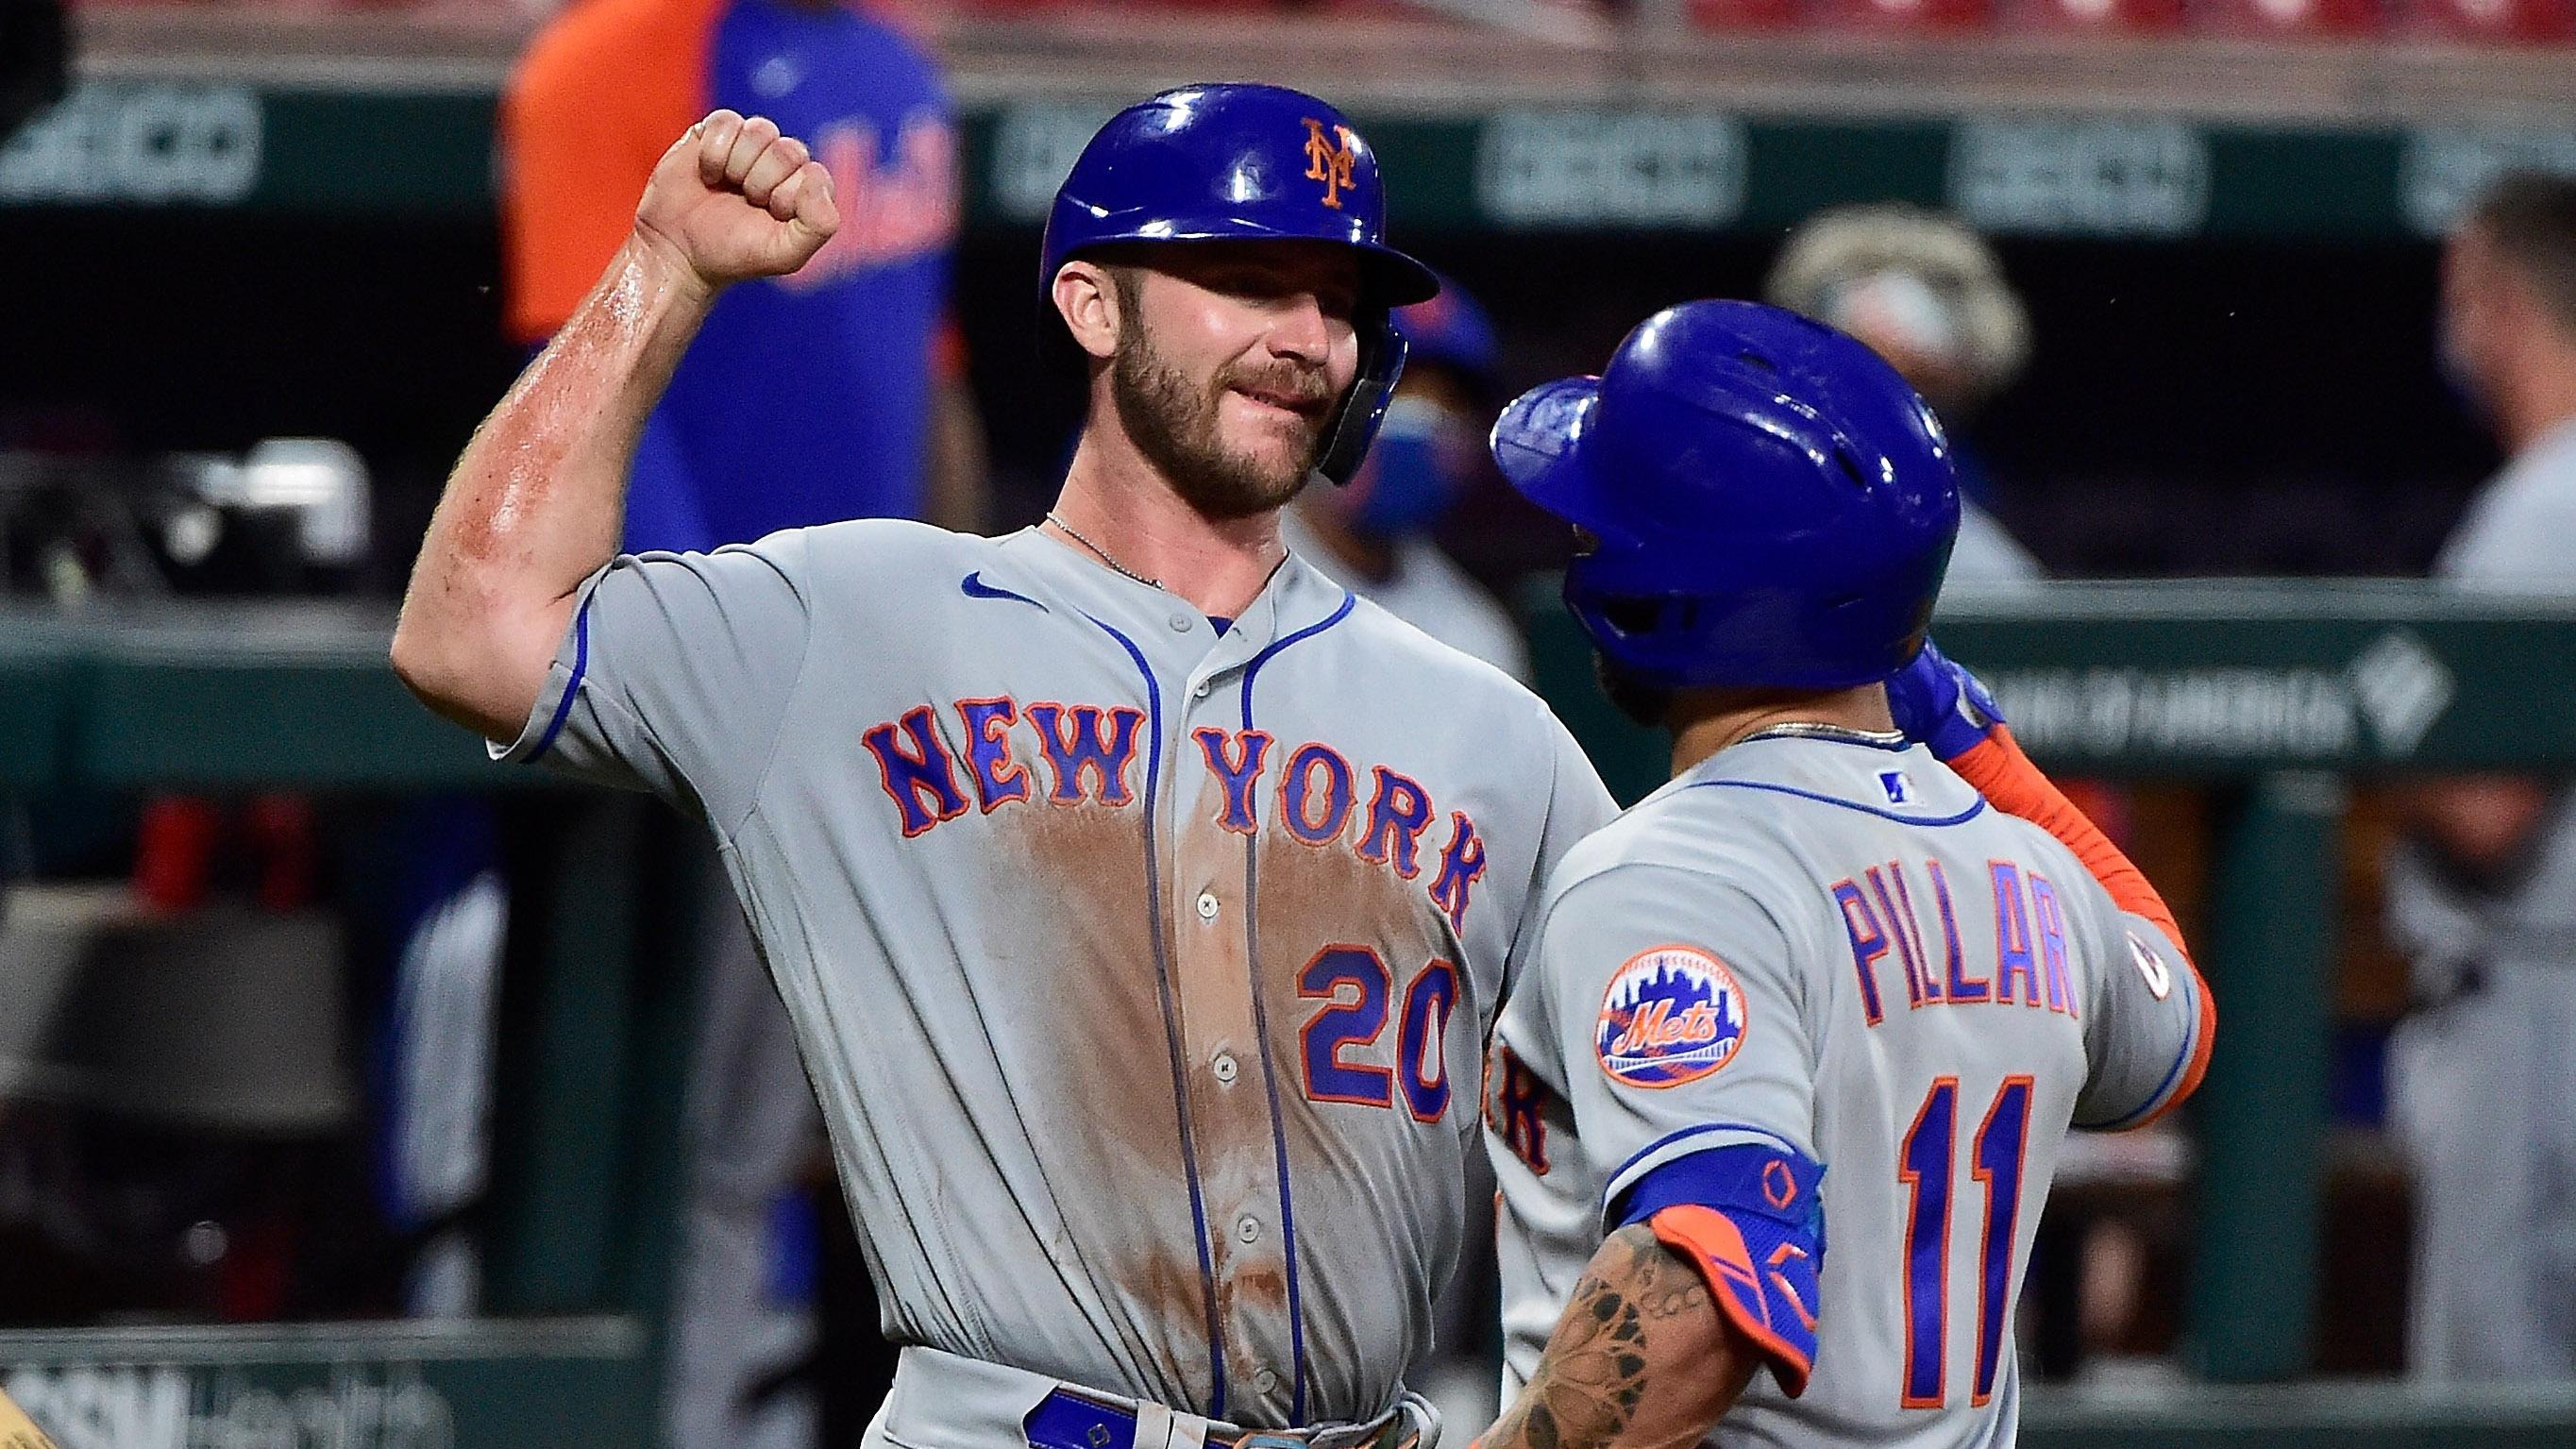 May 3, 2021; St. Louis, Missouri, USA; New York Mets center fielder Kevin Pillar (11) is congratulated by first baseman Pete Alonso (20) after hitting a two run home run during the third inning against the St. Louis Cardinals at Busch Stadium. / Jeff Curry-USA TODAY Sports